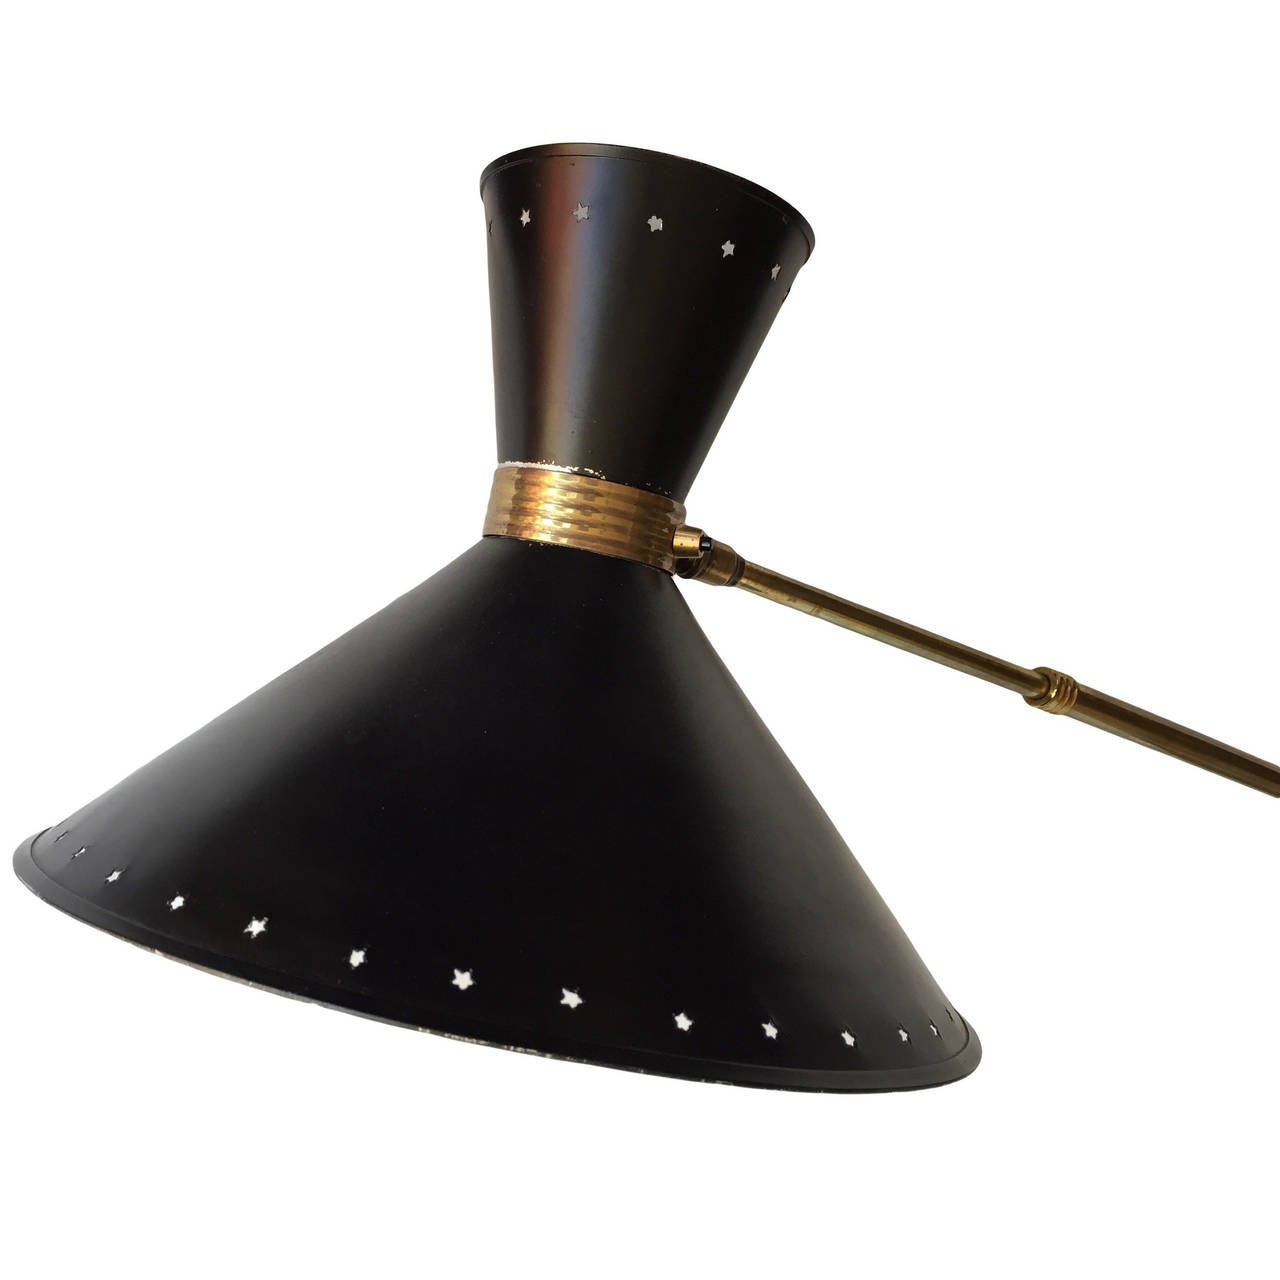 Large extending Midcentury wall light in brass and black painted steel by Rene Matheiu, France, 1950s. Diabolo design. Top and bottom cones have separate lamp switches.